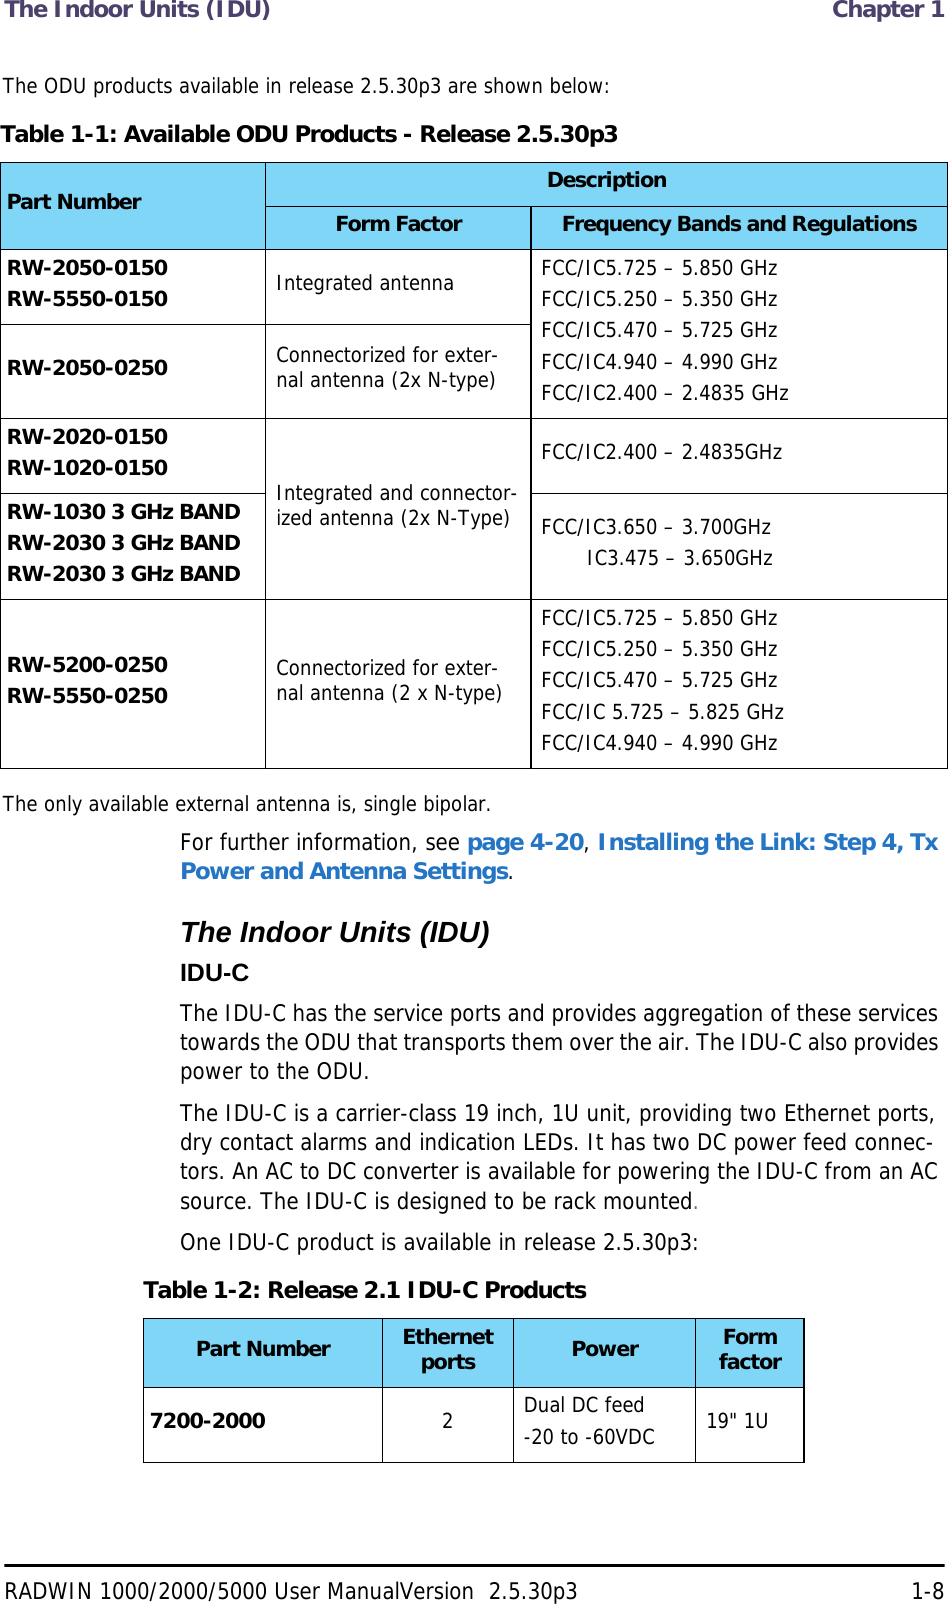 The Indoor Units (IDU)  Chapter 1RADWIN 1000/2000/5000 User ManualVersion  2.5.30p3 1-8The ODU products available in release 2.5.30p3 are shown below:The only available external antenna is, single bipolar.For further information, see page 4-20, Installing the Link: Step 4, Tx Power and Antenna Settings.The Indoor Units (IDU)IDU-CThe IDU-C has the service ports and provides aggregation of these services towards the ODU that transports them over the air. The IDU-C also provides power to the ODU.The IDU-C is a carrier-class 19 inch, 1U unit, providing two Ethernet ports, dry contact alarms and indication LEDs. It has two DC power feed connec-tors. An AC to DC converter is available for powering the IDU-C from an AC source. The IDU-C is designed to be rack mounted.One IDU-C product is available in release 2.5.30p3:Table 1-1: Available ODU Products - Release 2.5.30p3Part Number DescriptionForm Factor Frequency Bands and RegulationsRW-2050-0150RW-5550-0150 Integrated antenna  FCC/IC5.725 – 5.850 GHzFCC/IC5.250 – 5.350 GHzFCC/IC5.470 – 5.725 GHzFCC/IC4.940 – 4.990 GHzFCC/IC2.400 – 2.4835 GHzRW-2050-0250 Connectorized for exter-nal antenna (2x N-type)RW-2020-0150RW-1020-0150 Integrated and connector-ized antenna (2x N-Type)FCC/IC2.400 – 2.4835GHzRW-1030 3 GHz BANDRW-2030 3 GHz BANDRW-2030 3 GHz BANDFCC/IC3.650 – 3.700GHz       IC3.475 – 3.650GHzRW-5200-0250RW-5550-0250 Connectorized for exter-nal antenna (2 x N-type)FCC/IC5.725 – 5.850 GHzFCC/IC5.250 – 5.350 GHzFCC/IC5.470 – 5.725 GHzFCC/IC 5.725 – 5.825 GHzFCC/IC4.940 – 4.990 GHzTable 1-2: Release 2.1 IDU-C ProductsPart Number Ethernet ports Power Form factor7200-2000 2Dual DC feed-20 to -60VDC 19&quot; 1U